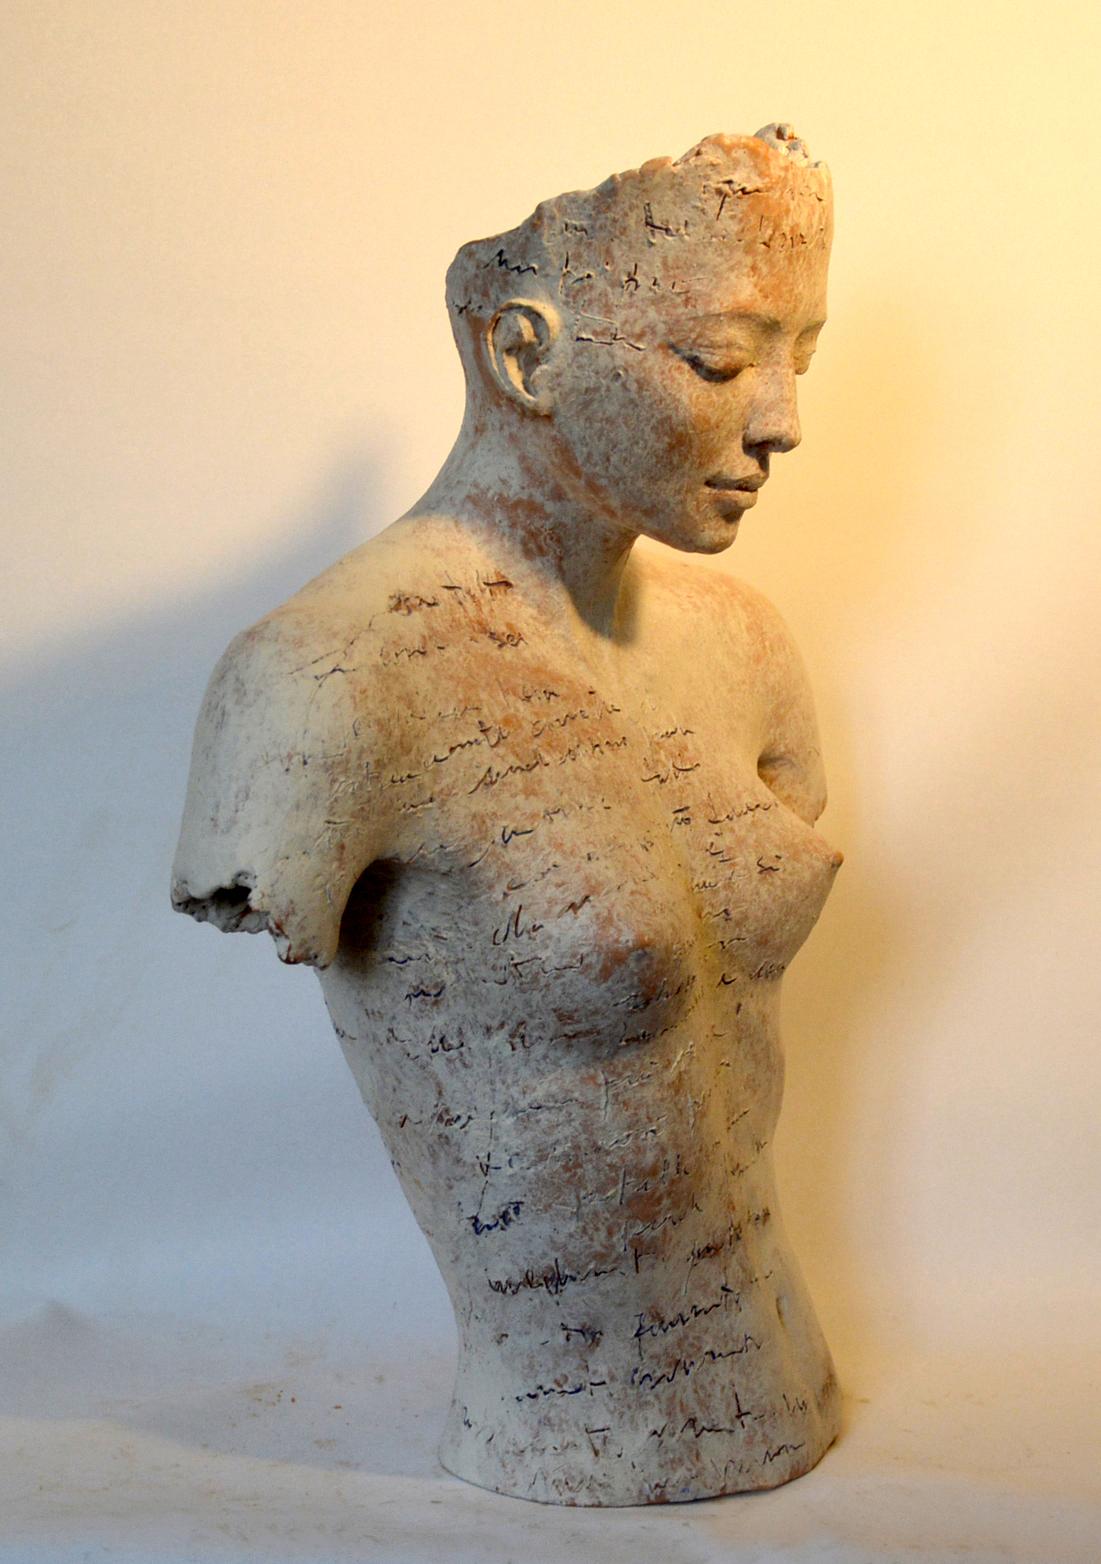 SKIN - Sculpture by Paola Grizi